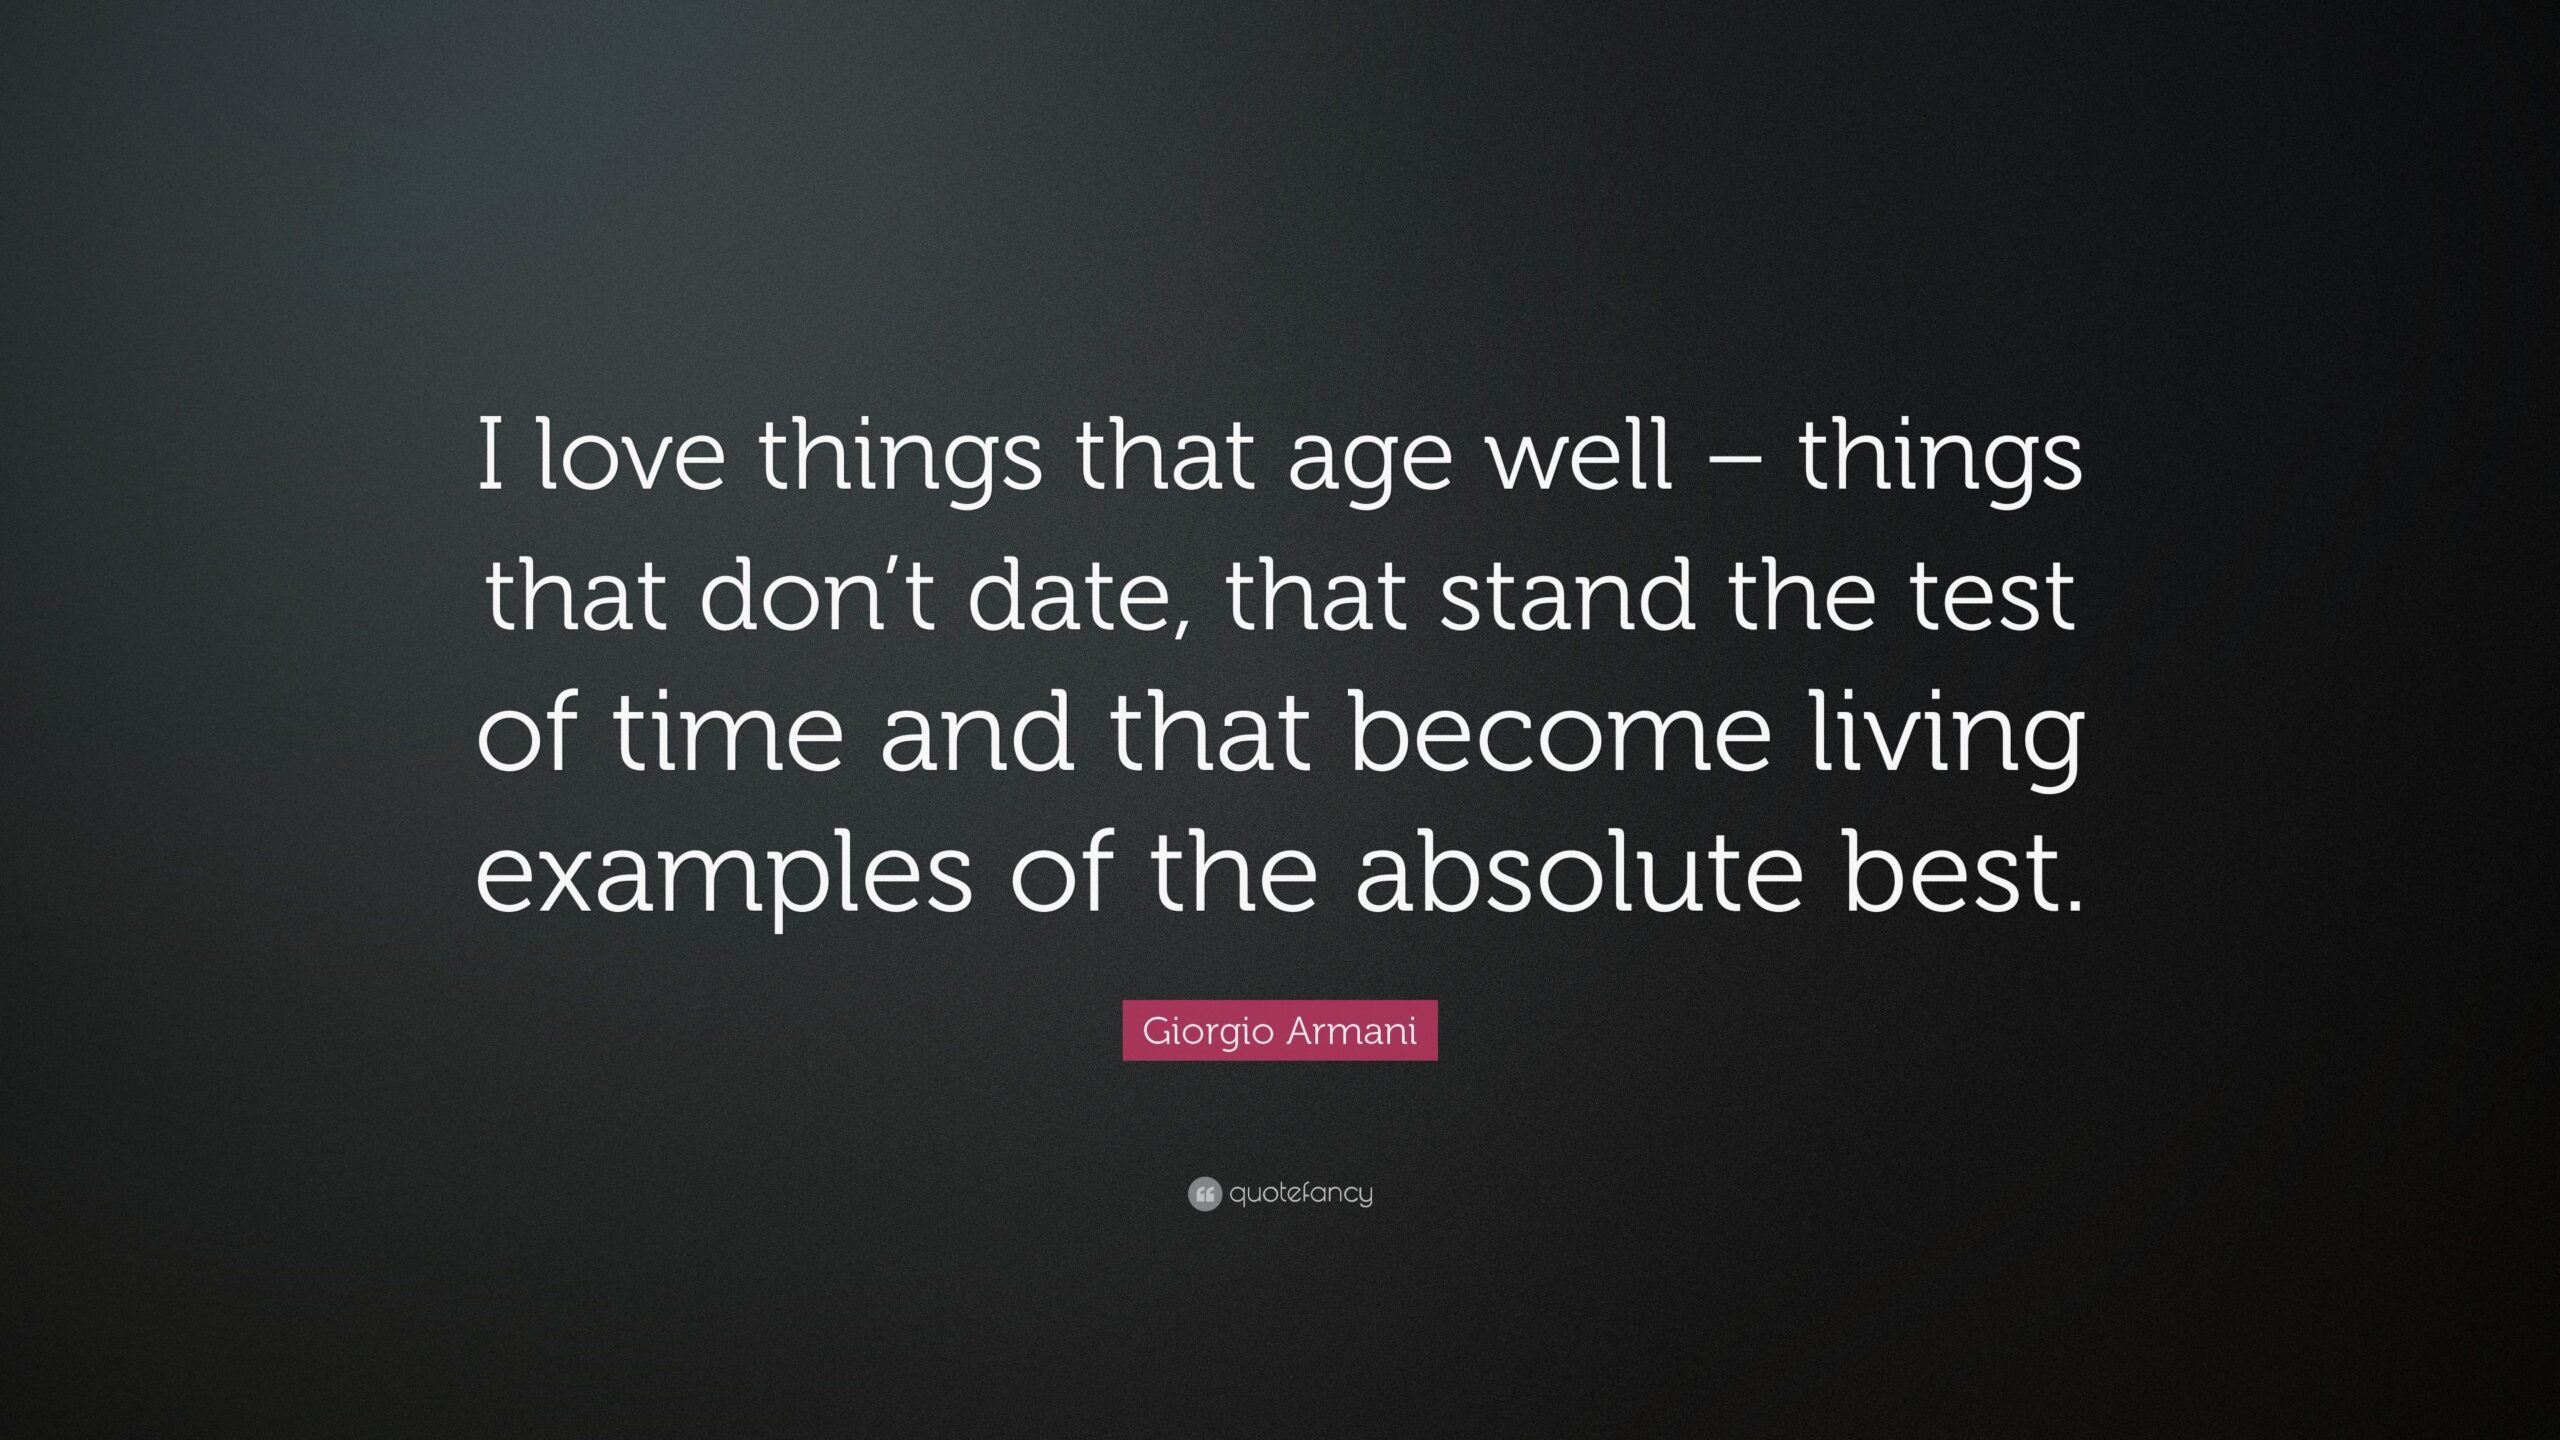 Giorgio Armani Quote “I love things that age well – things that don